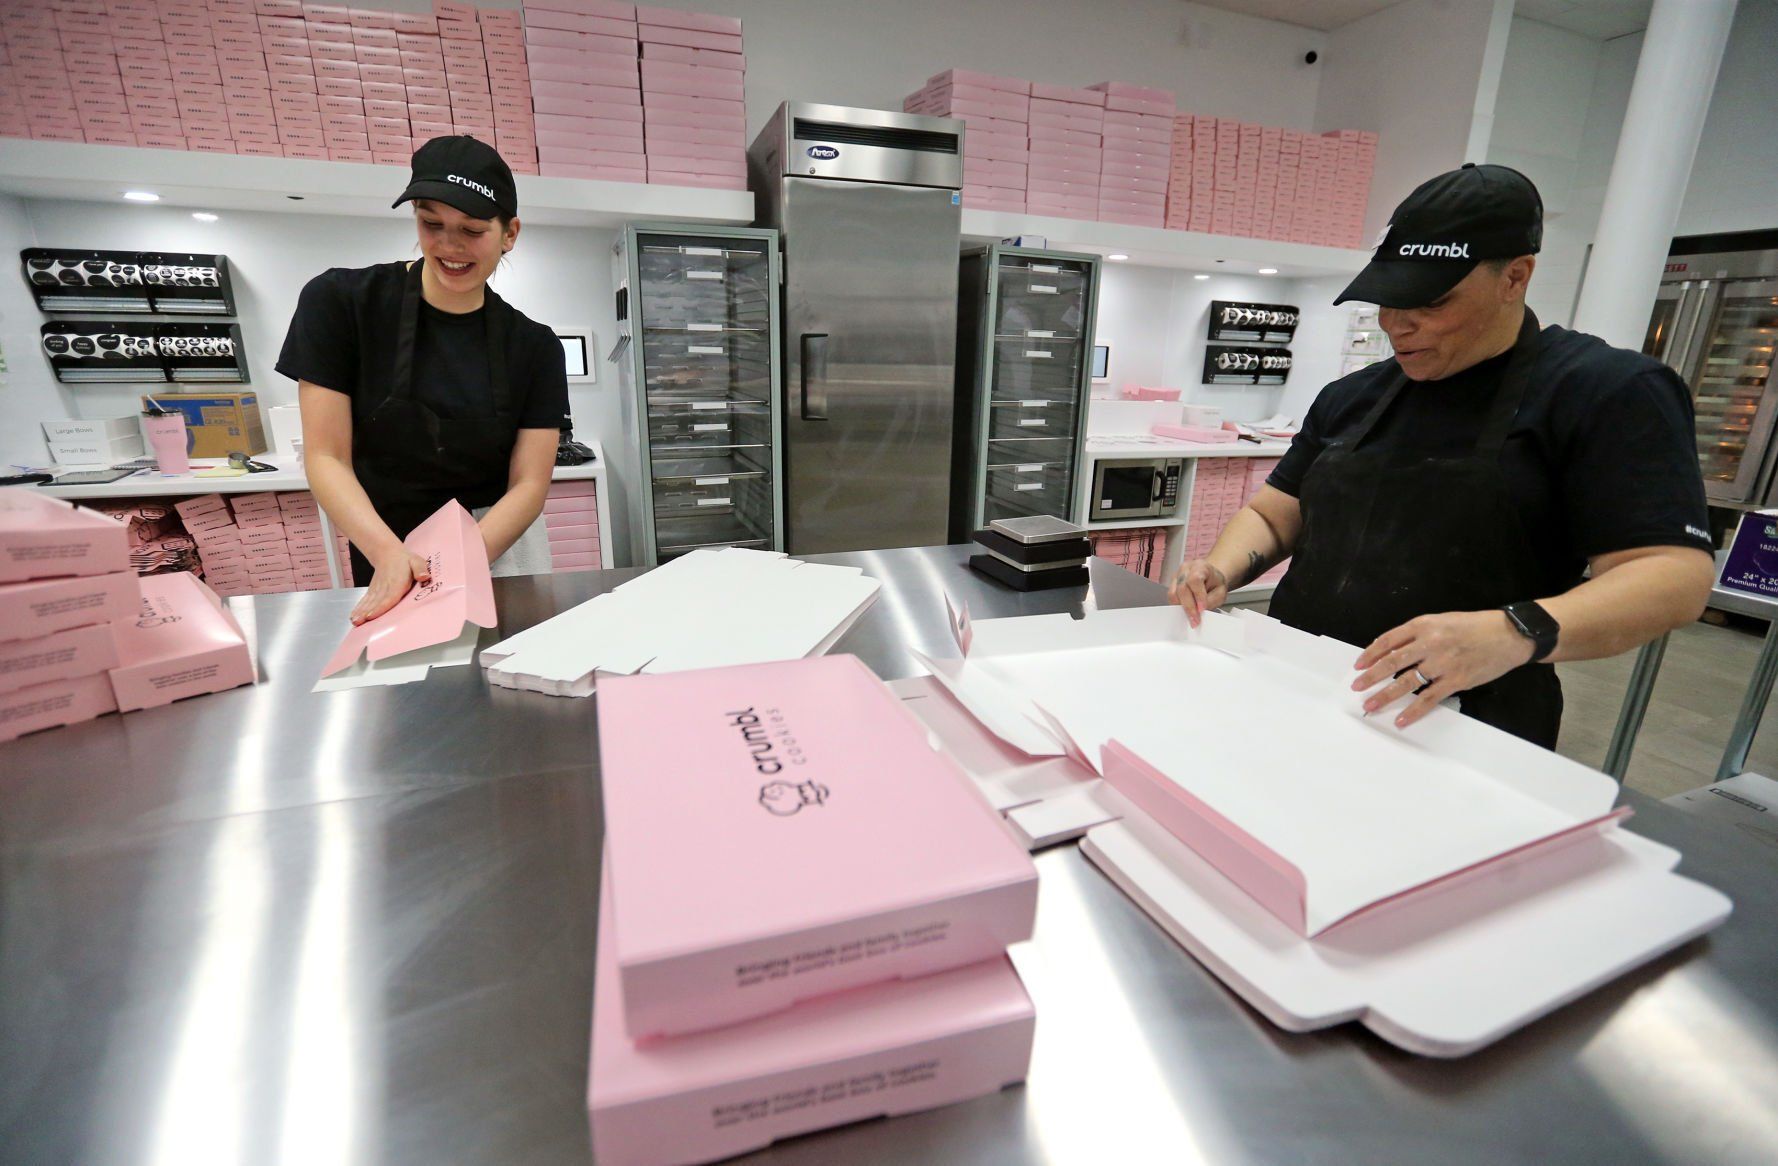 Cailyn Lord (left) and Claudette Irizarry make boxes at Crumbl Cookies in Dubuque on Wednesday, March 23, 2022. The store opens Friday, March 25.    PHOTO CREDIT: JESSICA REILLY